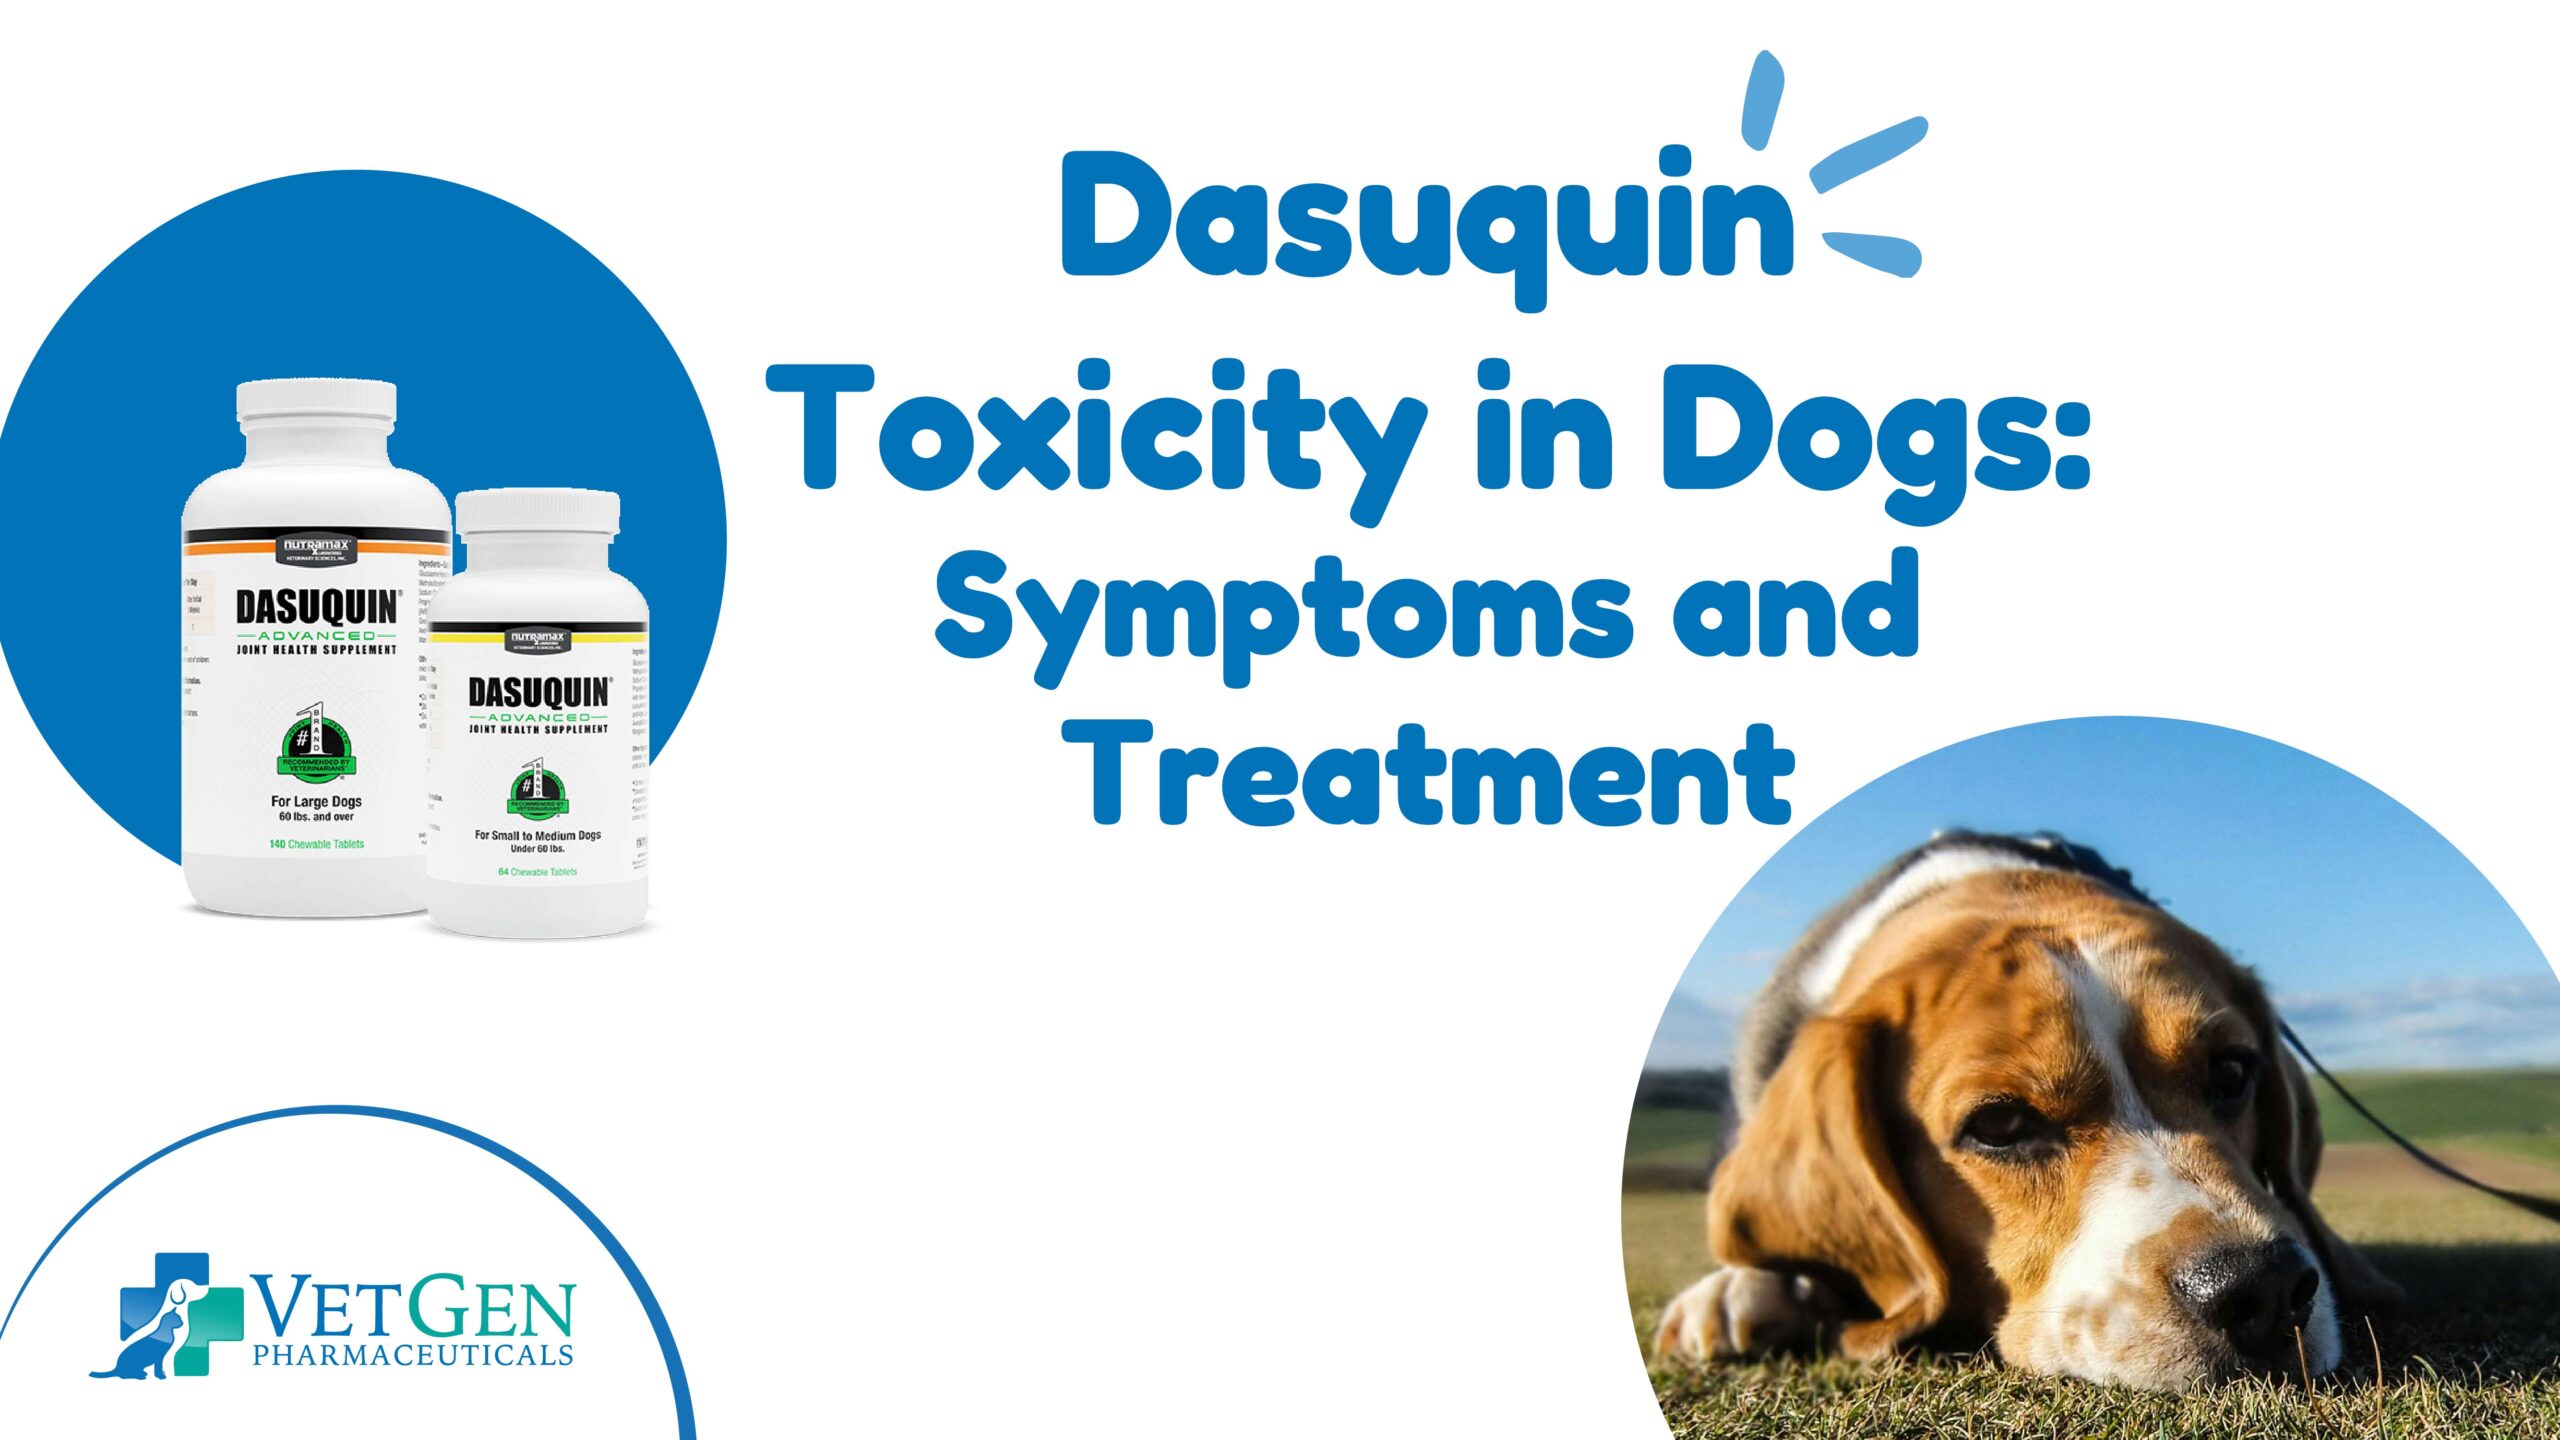 Dasuquin Toxicity in Dogs- Symptoms and Treatment